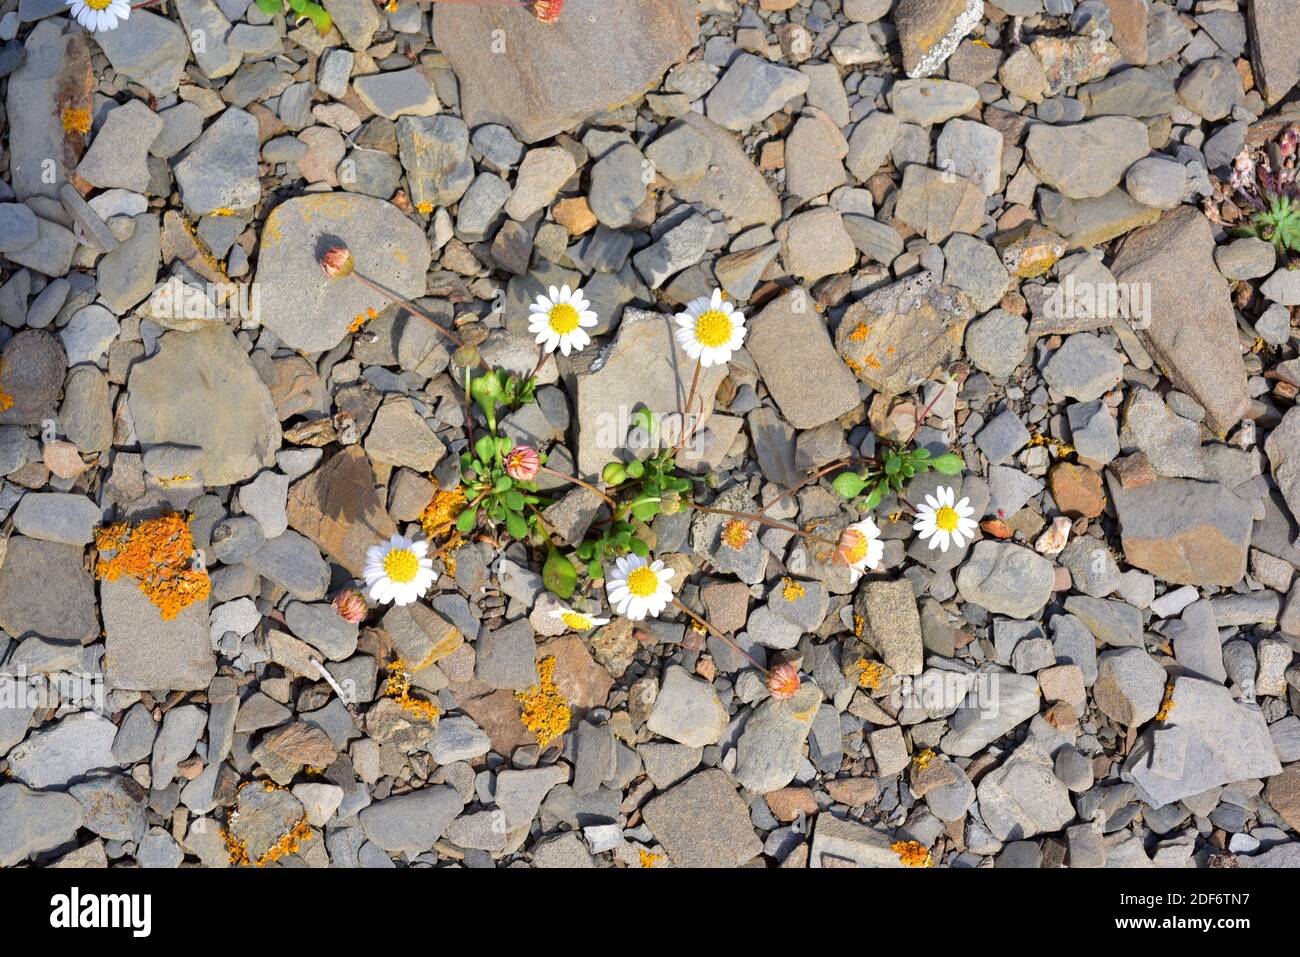 Miniature daisy or false daisy (Bellium bellidioides) is an herbaceous plant endemic to Balearic Islands, Corsica and Sardinia. This photo was taken Stock Photo